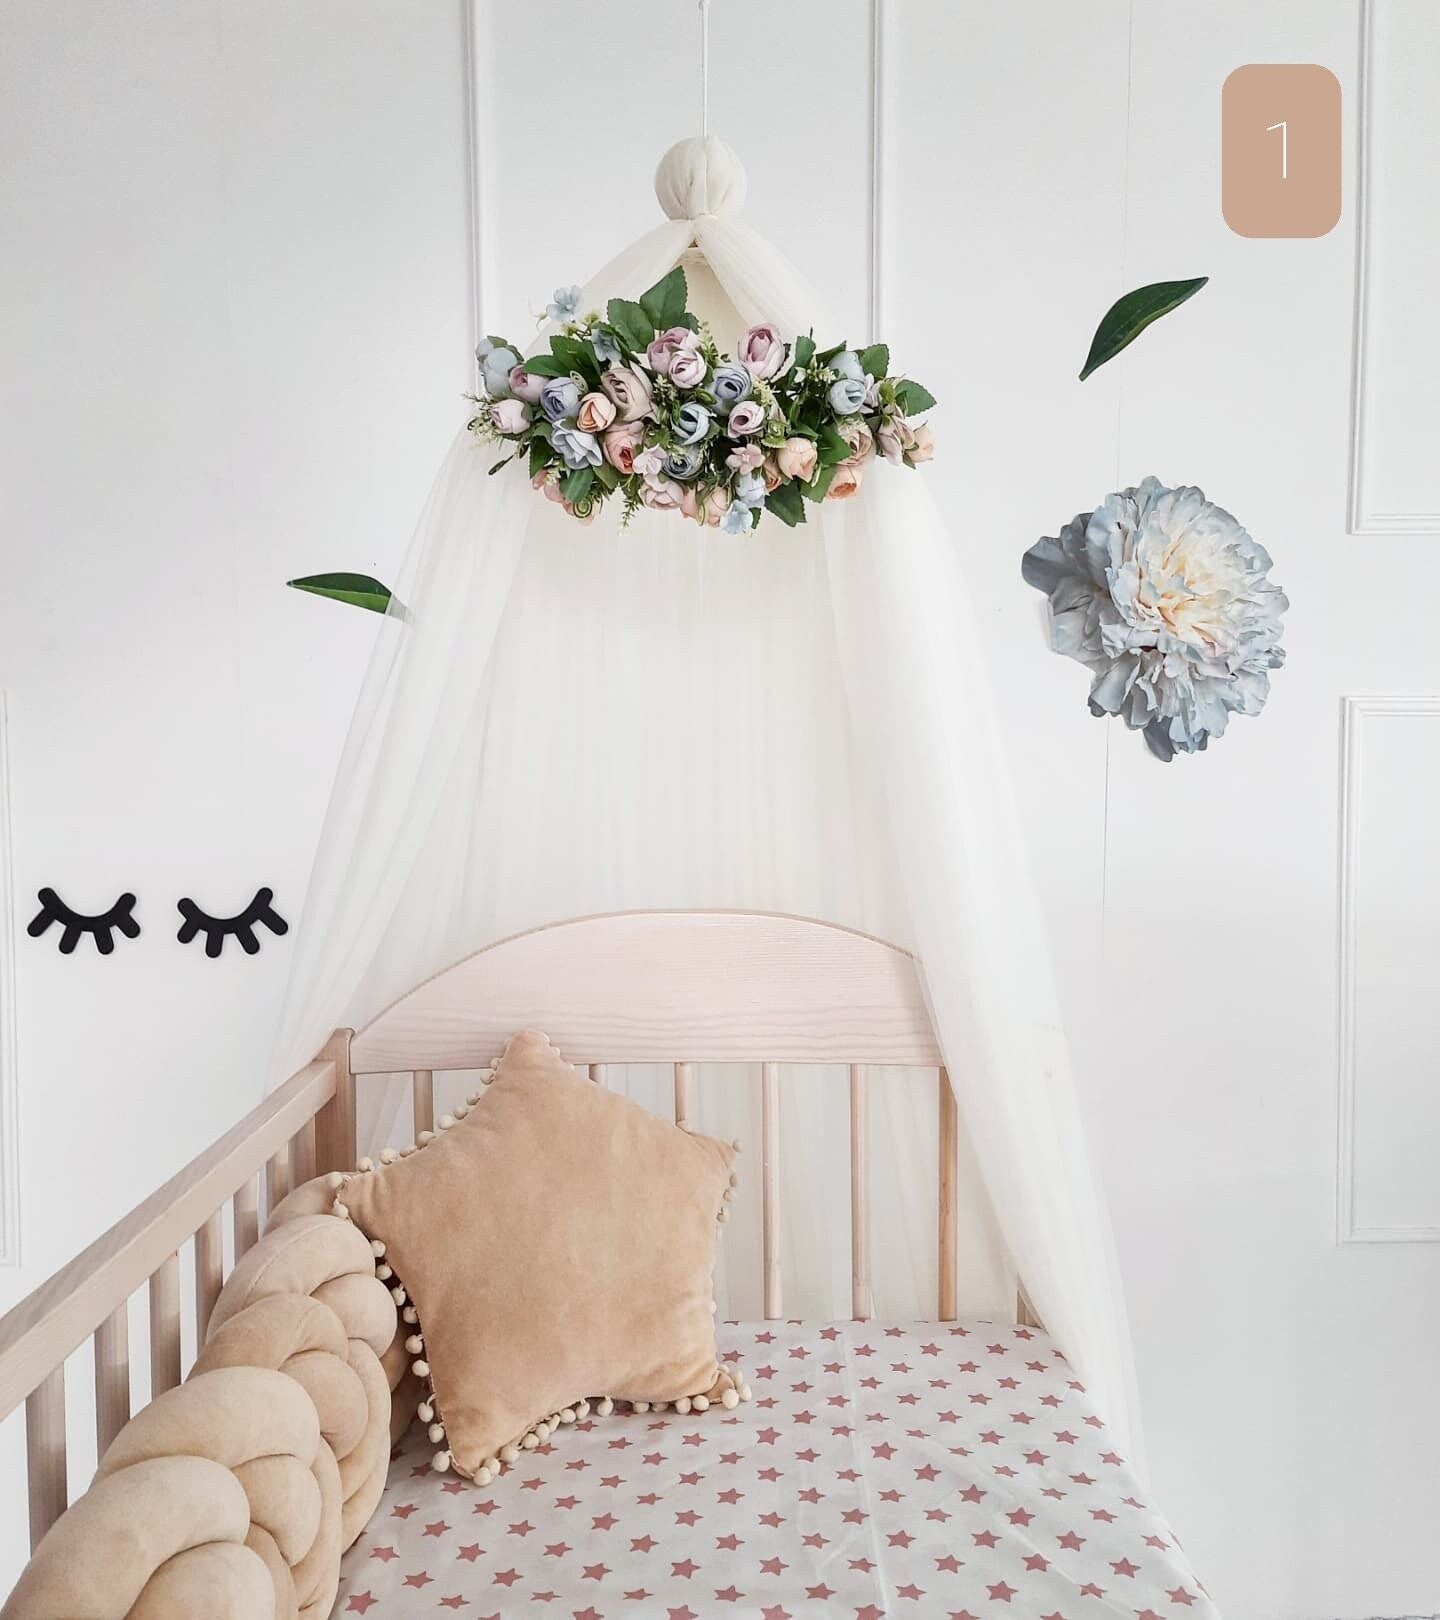 Bed tulle canopy for nursery / Kids hanging tent for bedroom / Princess playhouse / flowers canopy +Swan pillow as a gift